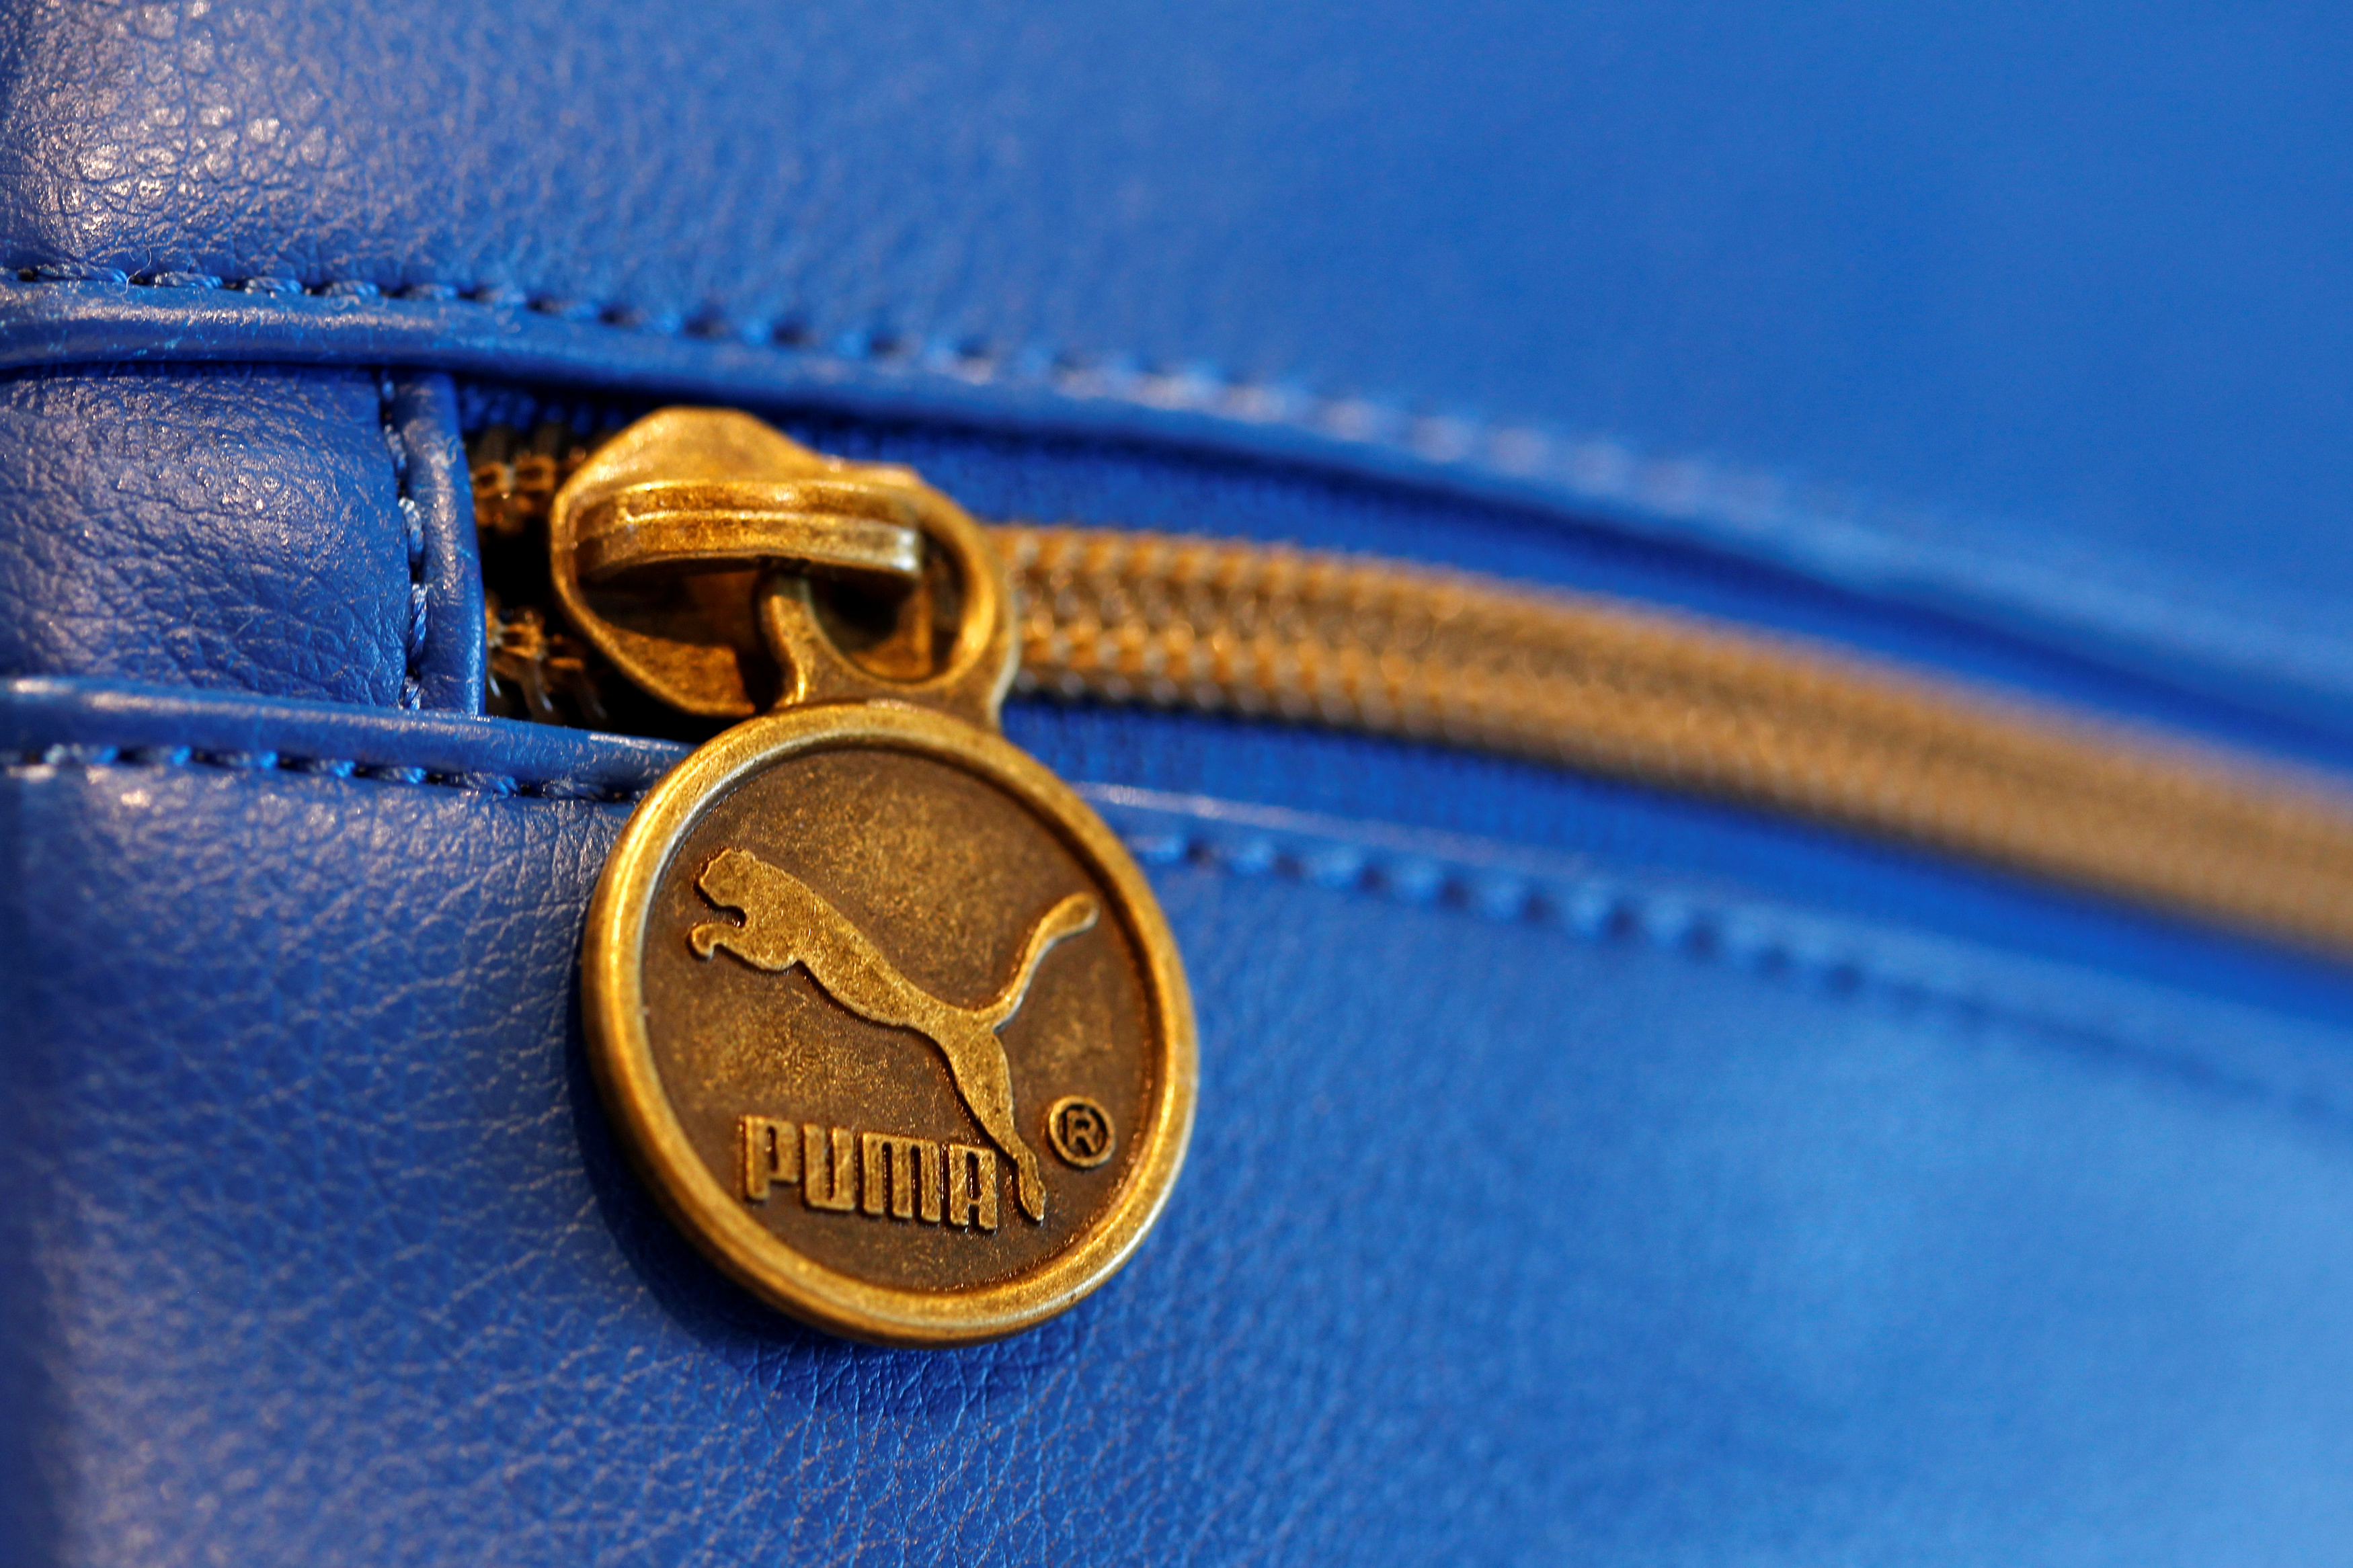 A Puma handbag is pictured in a shop after the company's annual news conference in Herzogenaurach